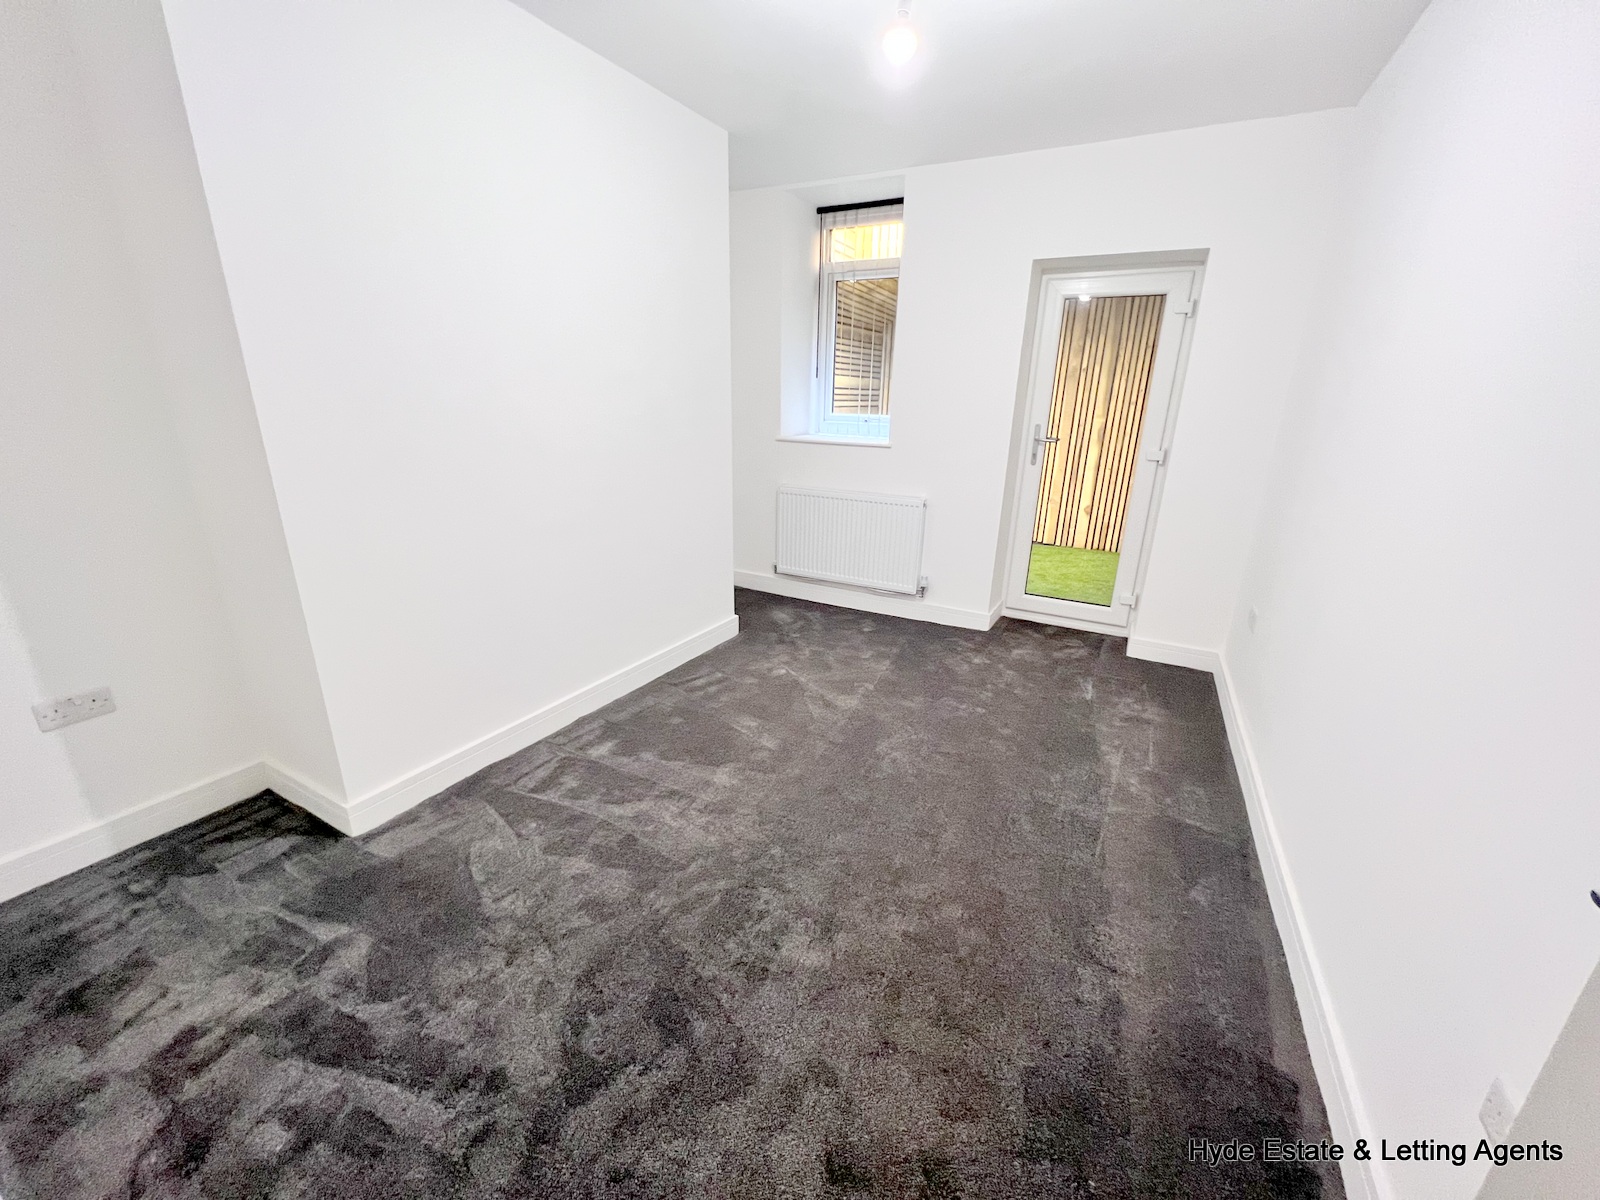 Images for Flat 7 Parsons Lane, Bury, BL9 0LY